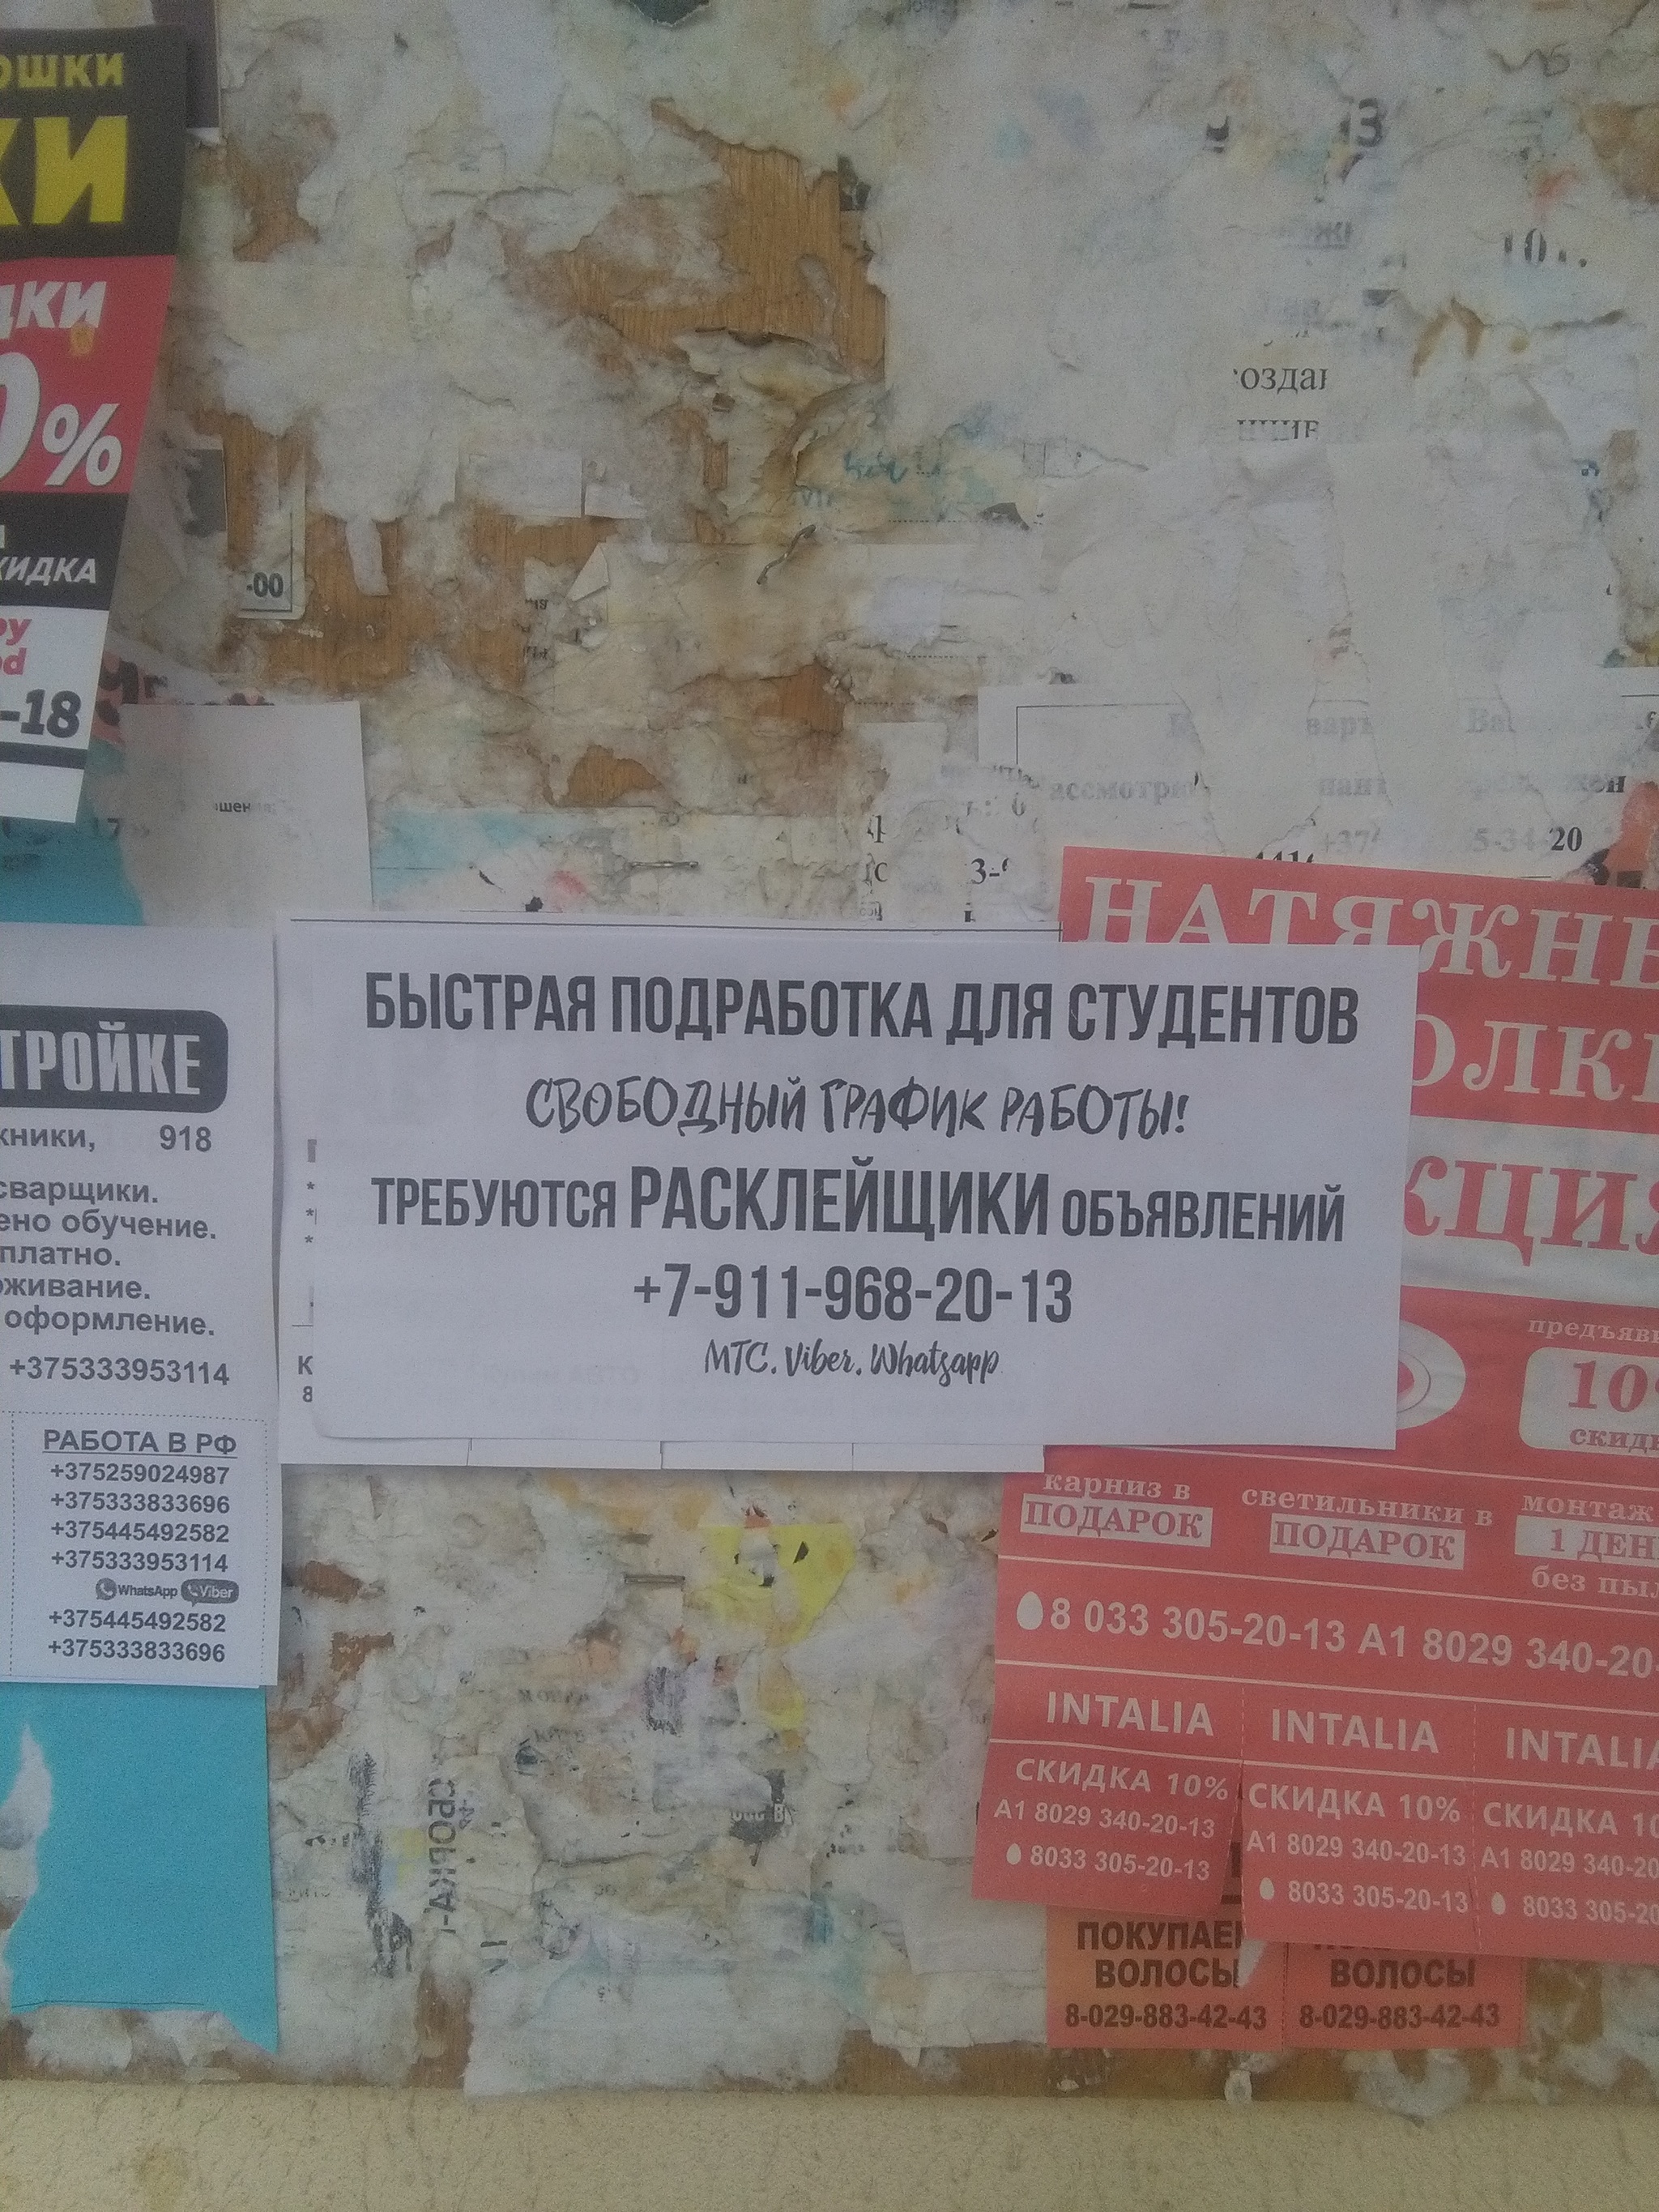 An ad poster is required to post advertisements about posting advertisements. - My, Republic of Belarus, Strange ads